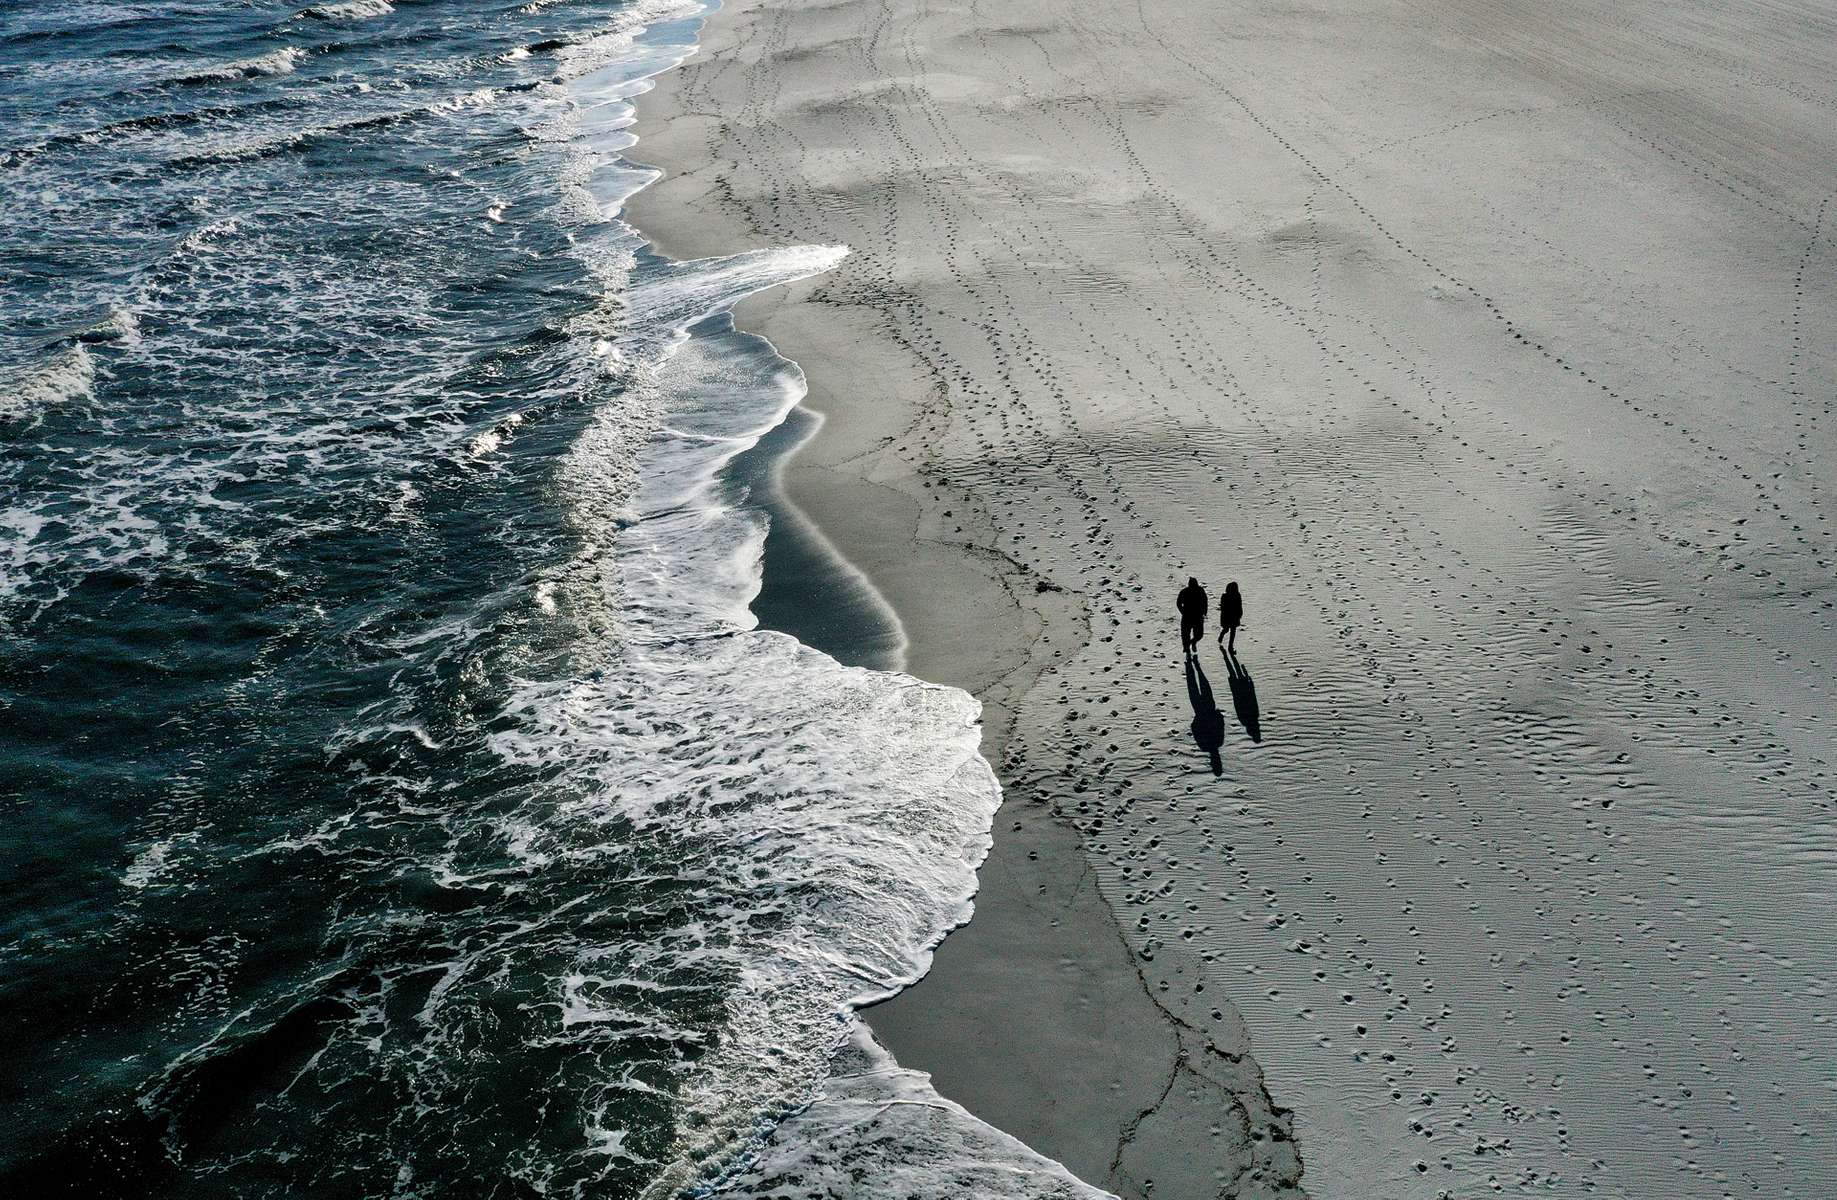 An aerial view of a couple walking on the sand by the ocean of Long Beach on April 22, 2020 in Long Beach, New York.  The boardwalk has remained closed since March 27 due to the coronavirus COVID-19 pandemic.The World Health Organization declared coronavirus (COVID-19) a global pandemic on March 11th.  